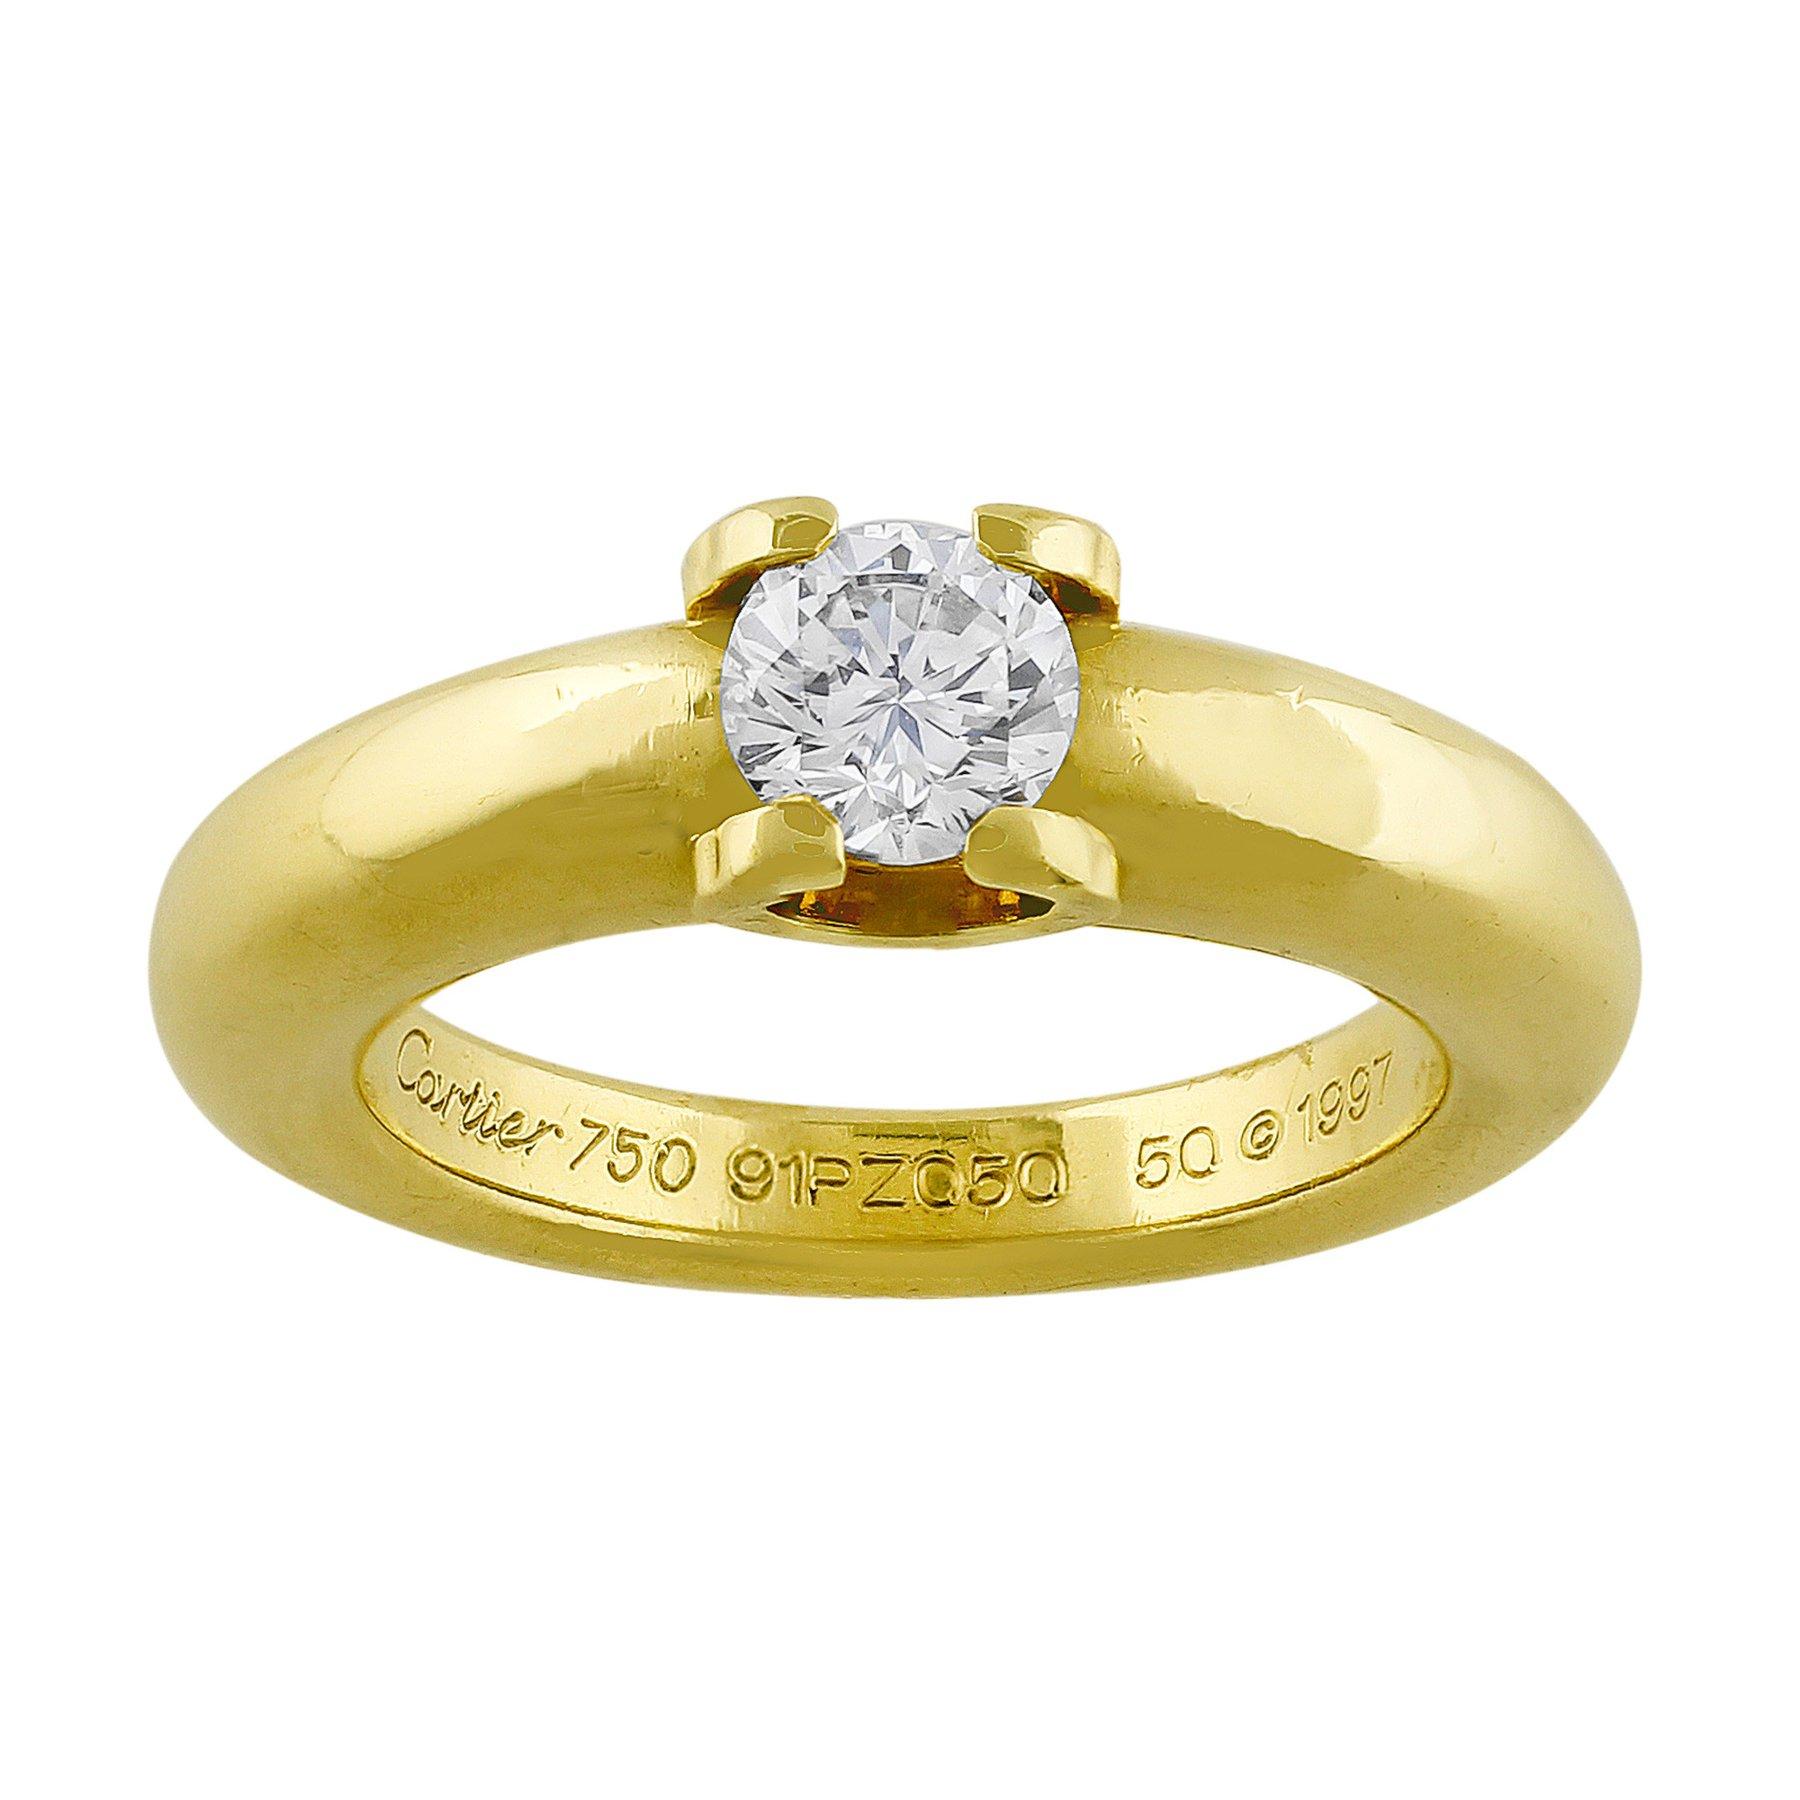 Estate Cartier Brilliant Cut Diamond Ring. Estate Cartier 18k yellow gold ring set with a certified round brilliant cut diamond of approximately 0.50cts.